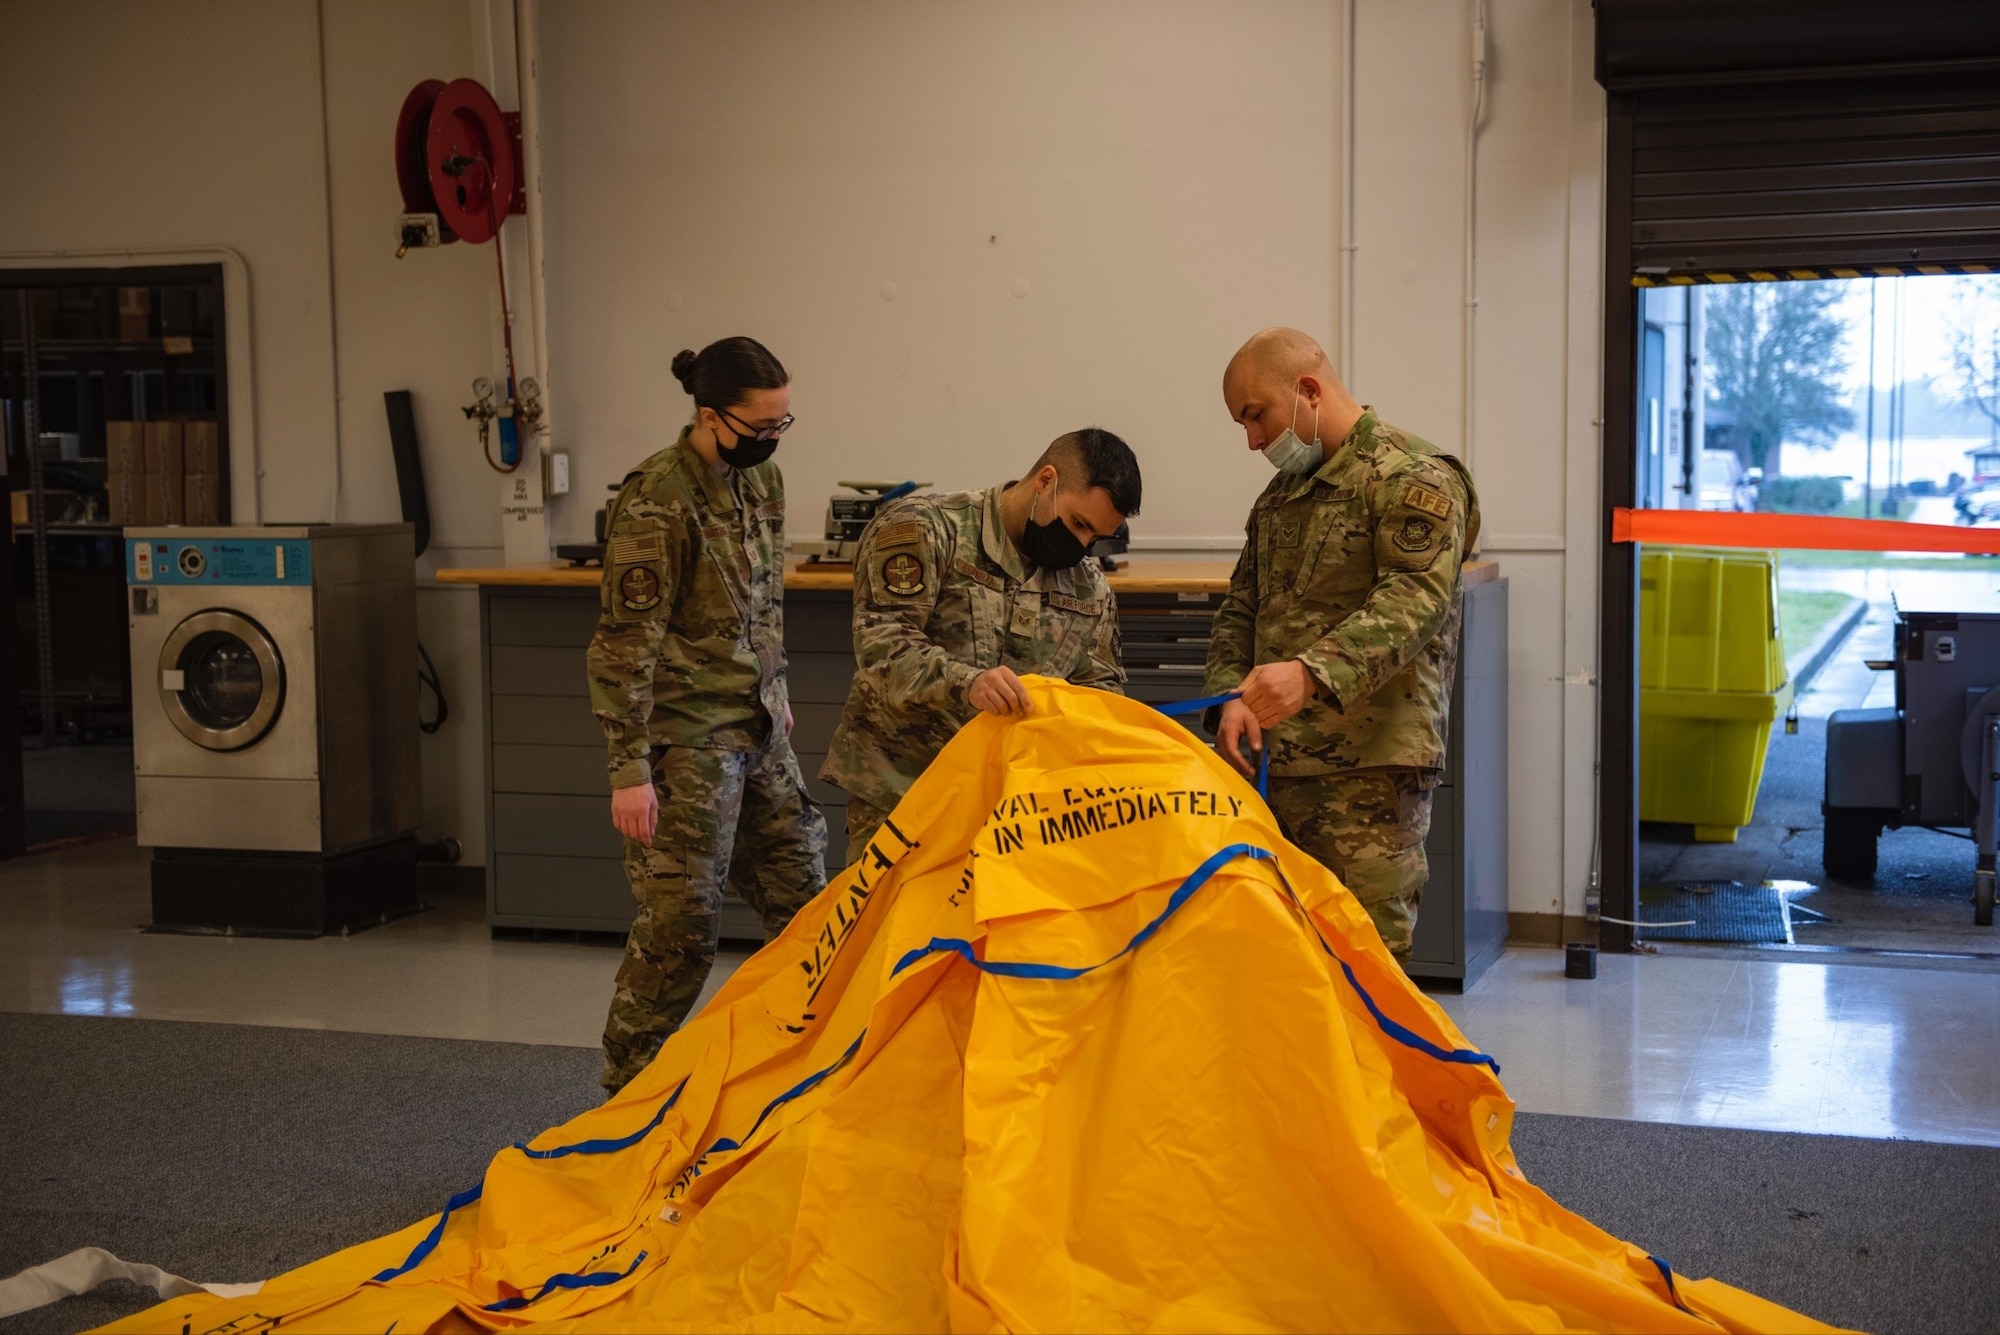 U.S. Air Force Airmen from the 62nd Operations Group aircrew flight equipment section, conduct life raft inspections at Joint Base Lewis-McChord, Wash., Feb. 19, 2022. The AFE members perform inspections, maintenance, and adjustments of assigned aircrew flight equipment, aircrew chemical defense equipment, night vision goggles, and aircrew laser eye protection. (U.S. Air Force photo by Tech. Sgt. Benjamin Sutton)